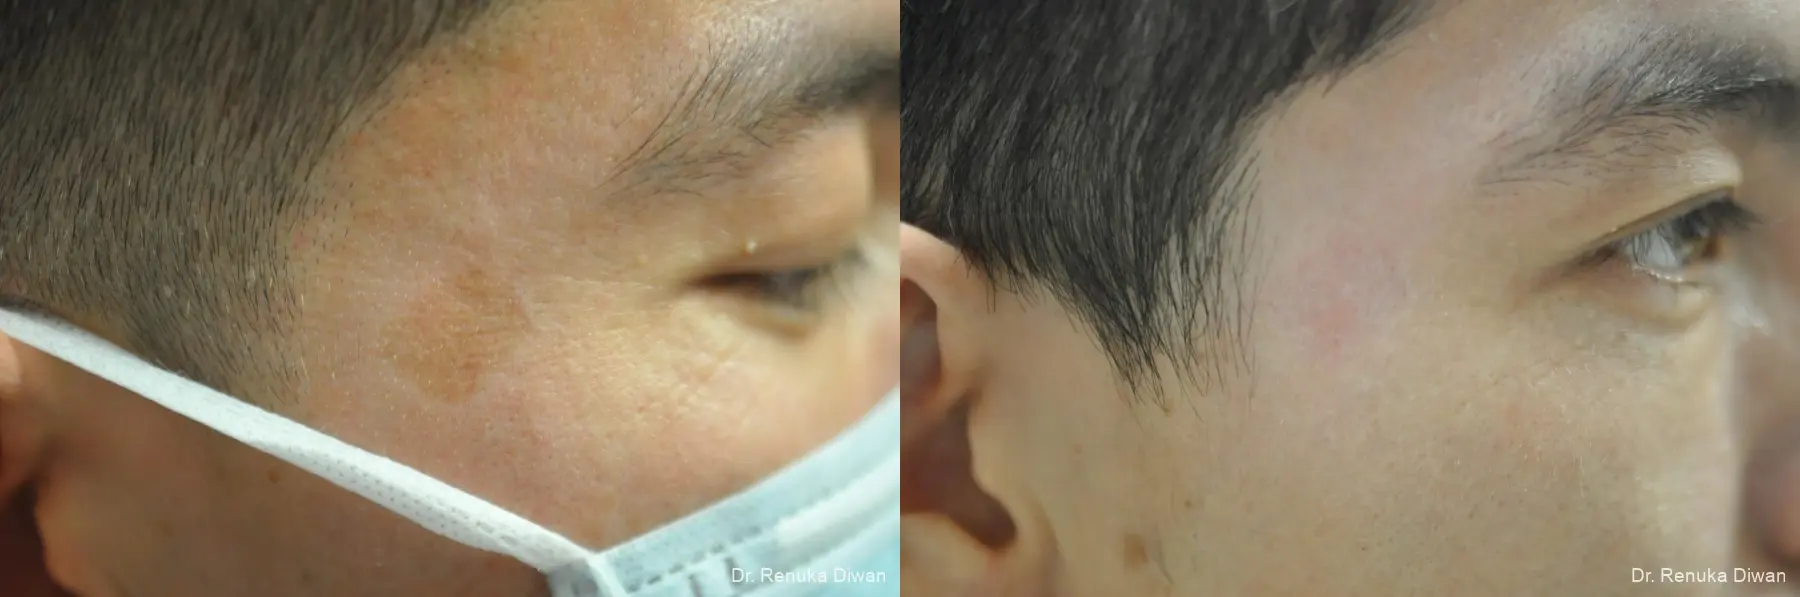 Mole Removal For Men: Patient 1 - Before and After 1